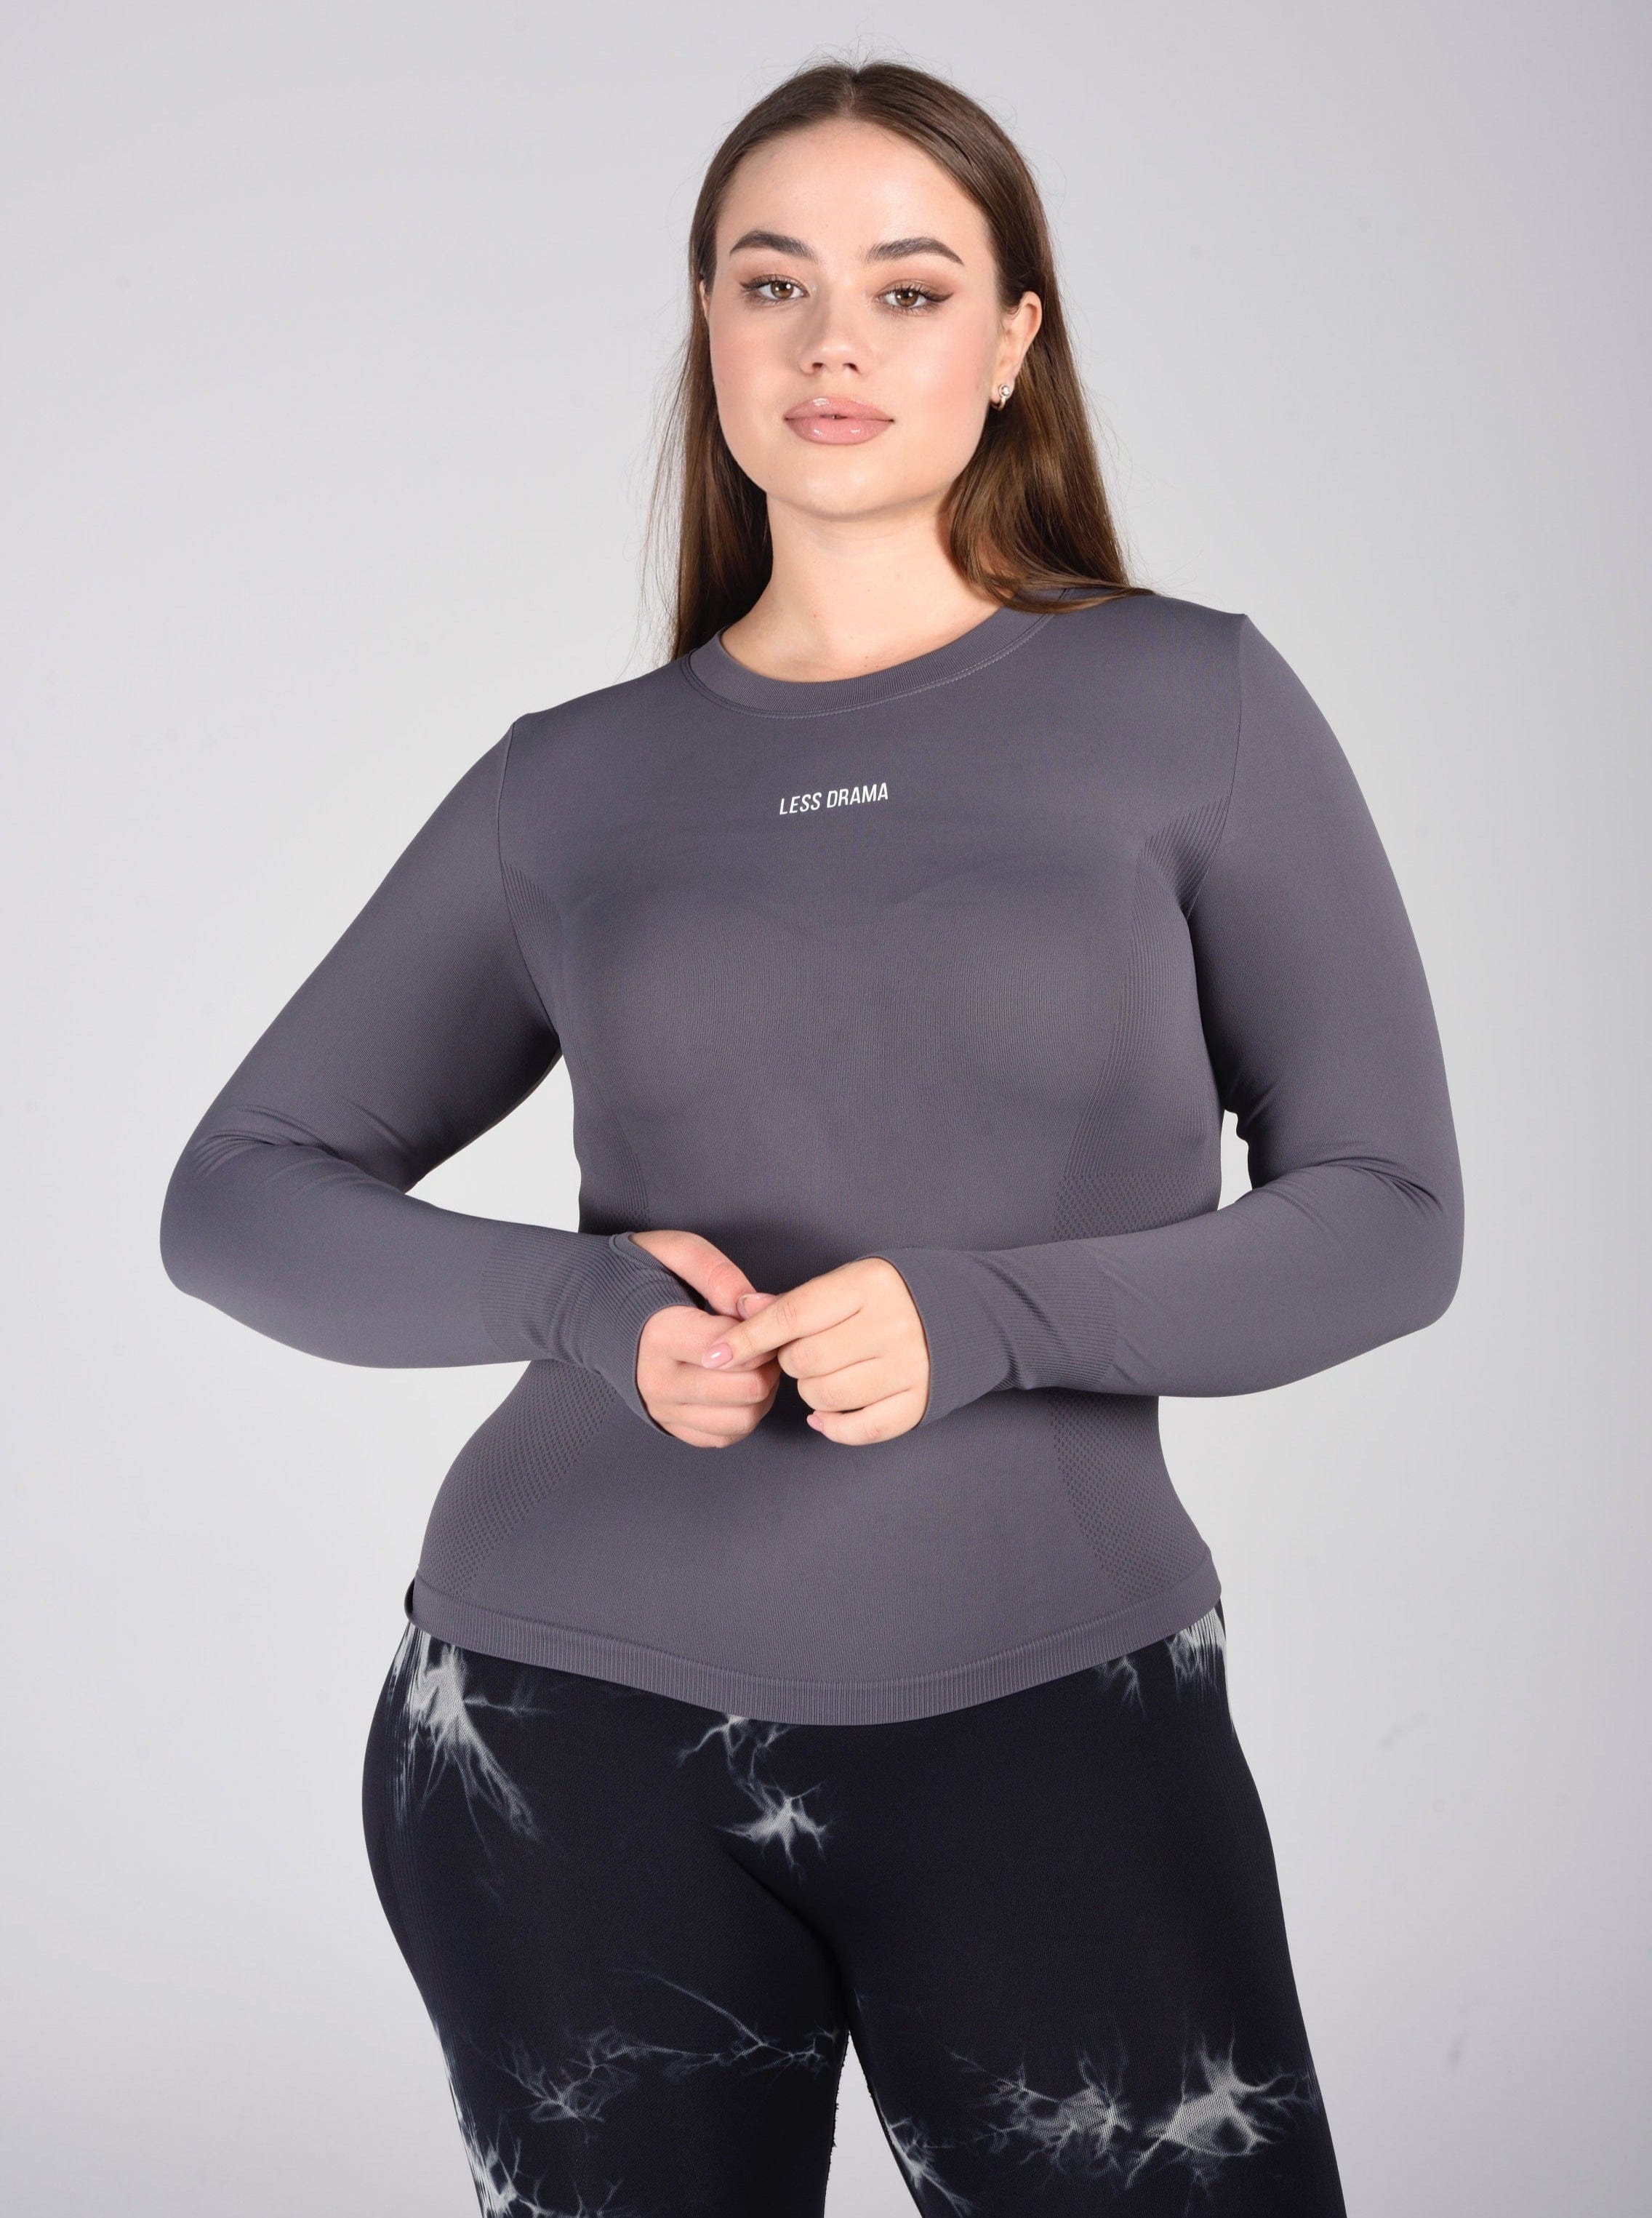 Unbothered Long Sleeve Top - Grey